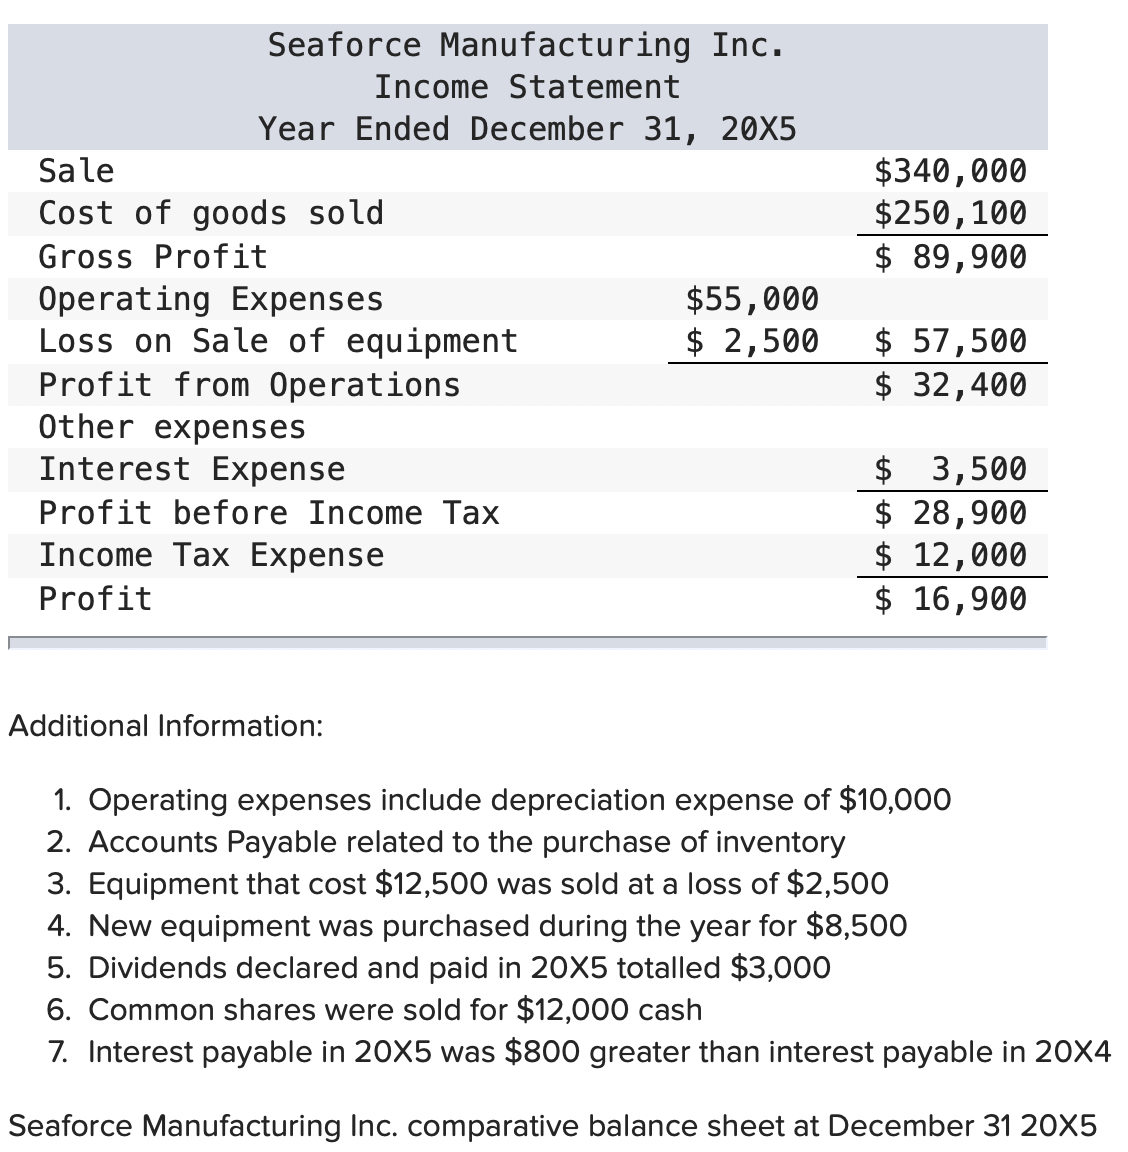 Seaforce Manufacturing Inc.
Income Statement
Year Ended December 31, 20X5
Sale
Cost of goods sold
Gross Profit
Operating Expenses
Loss on Sale of equipment
Profit from Operations
Other expenses
Interest Expense
Profit before Income Tax
Income Tax Expense
Profit
Additional Information:
$55,000
$ 2,500
$340,000
$250, 100
$ 89,900
$ 57,500
$ 32,400
$ 3,500
$ 28,900
$ 12,000
$ 16,900
1. Operating expenses include depreciation expense of $10,000
2. Accounts Payable related to the purchase of inventory
3. Equipment that cost $12,500 was sold at a loss of $2,500
4. New equipment was purchased during the year for $8,500
5. Dividends declared and paid in 20X5 totalled $3,000
6. Common shares were sold for $12,000 cash
7. Interest payable in 20X5 was $800 greater than interest payable in 20X4
Seaforce Manufacturing Inc. comparative balance sheet at December 31 20X5